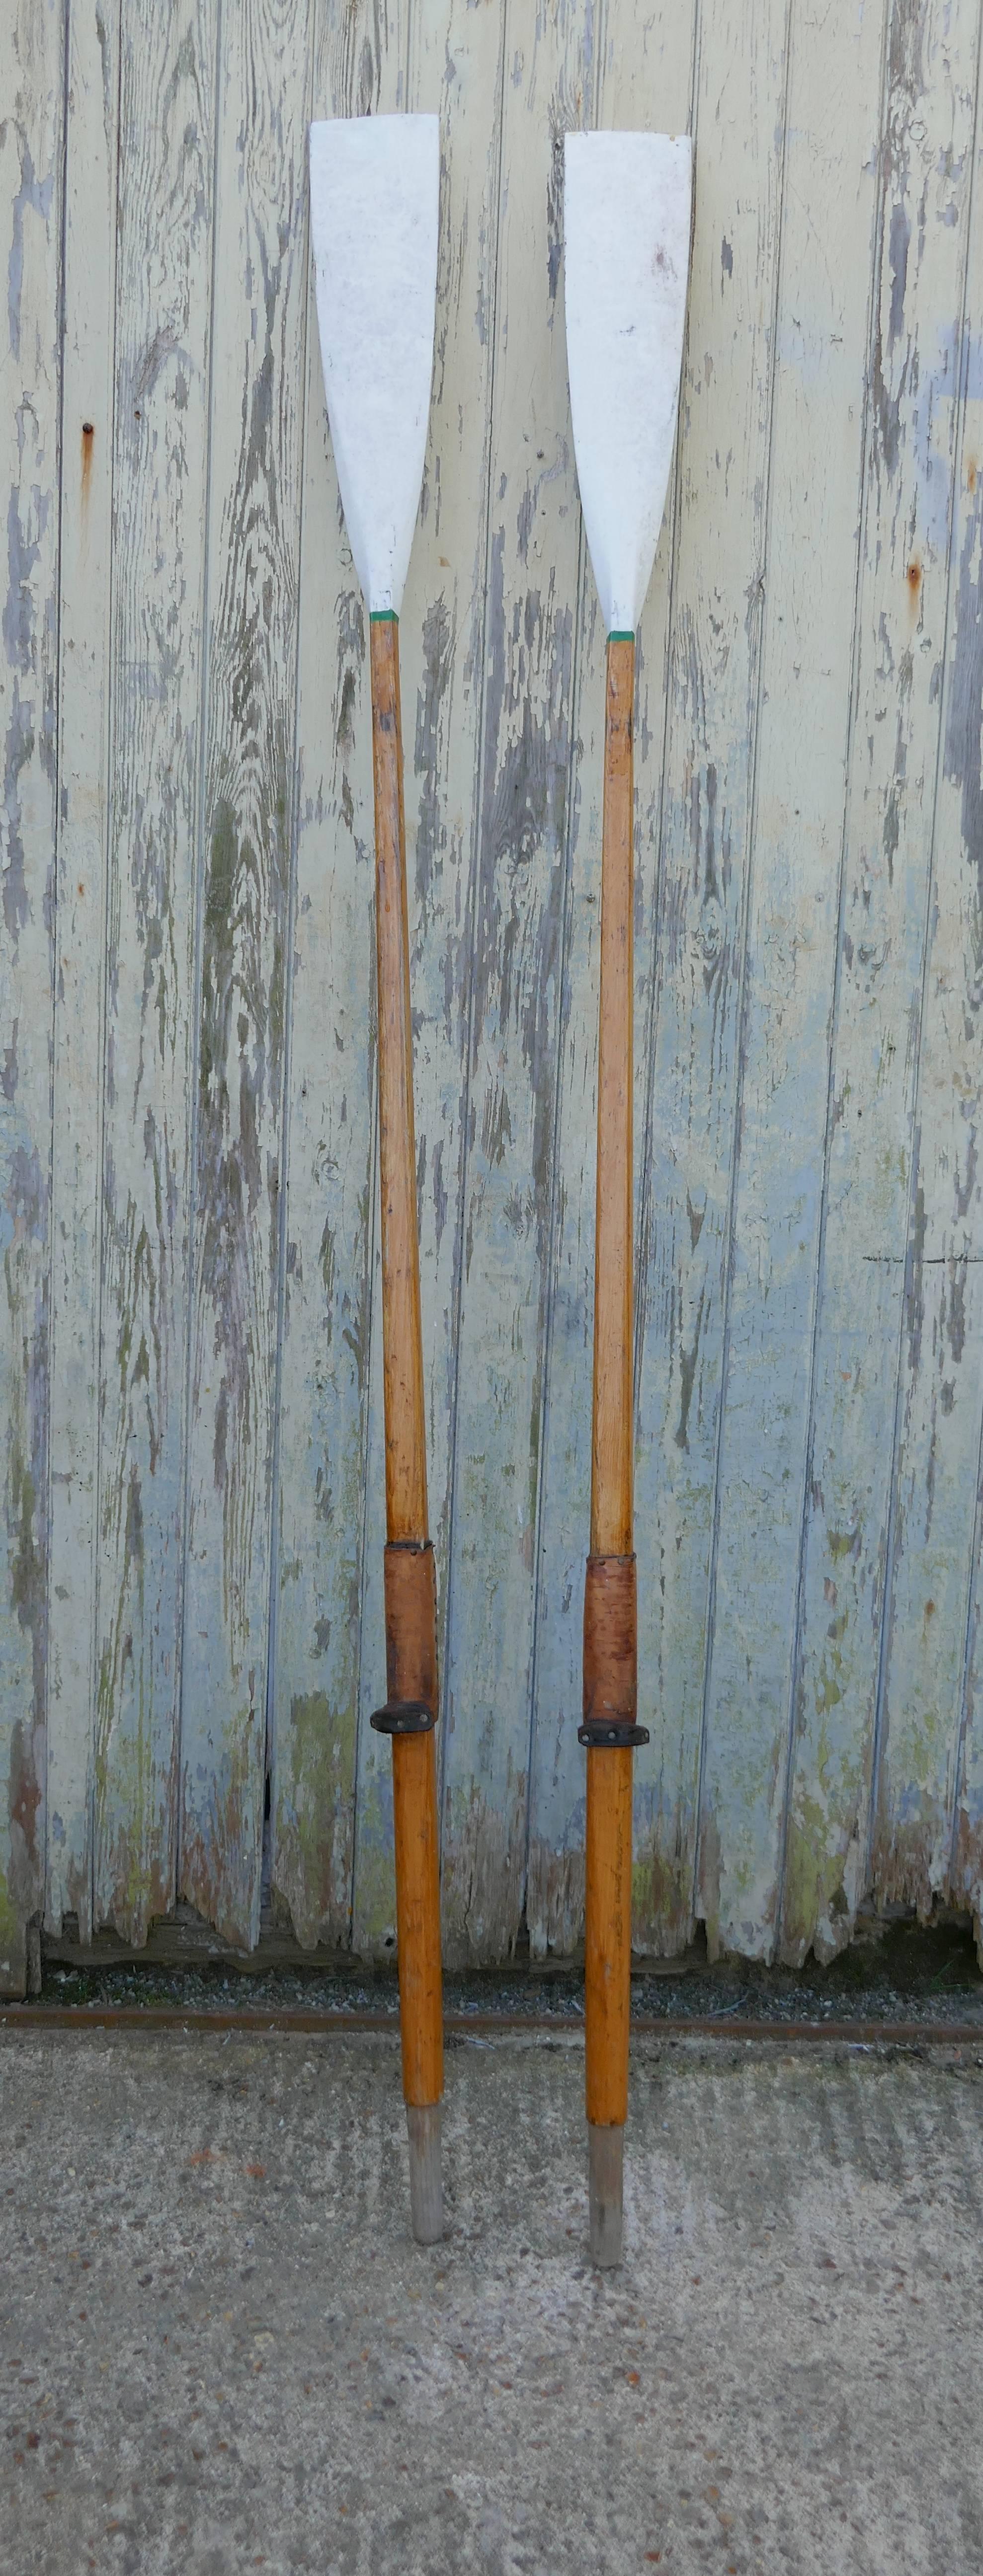 A pair of decorative long sculling oars

This is a fine quality pair of long oars from a Thames Rowing Club, the spoons or blades are painted in white and the long ash shafts are in their original varnished finish each with their old brown leather